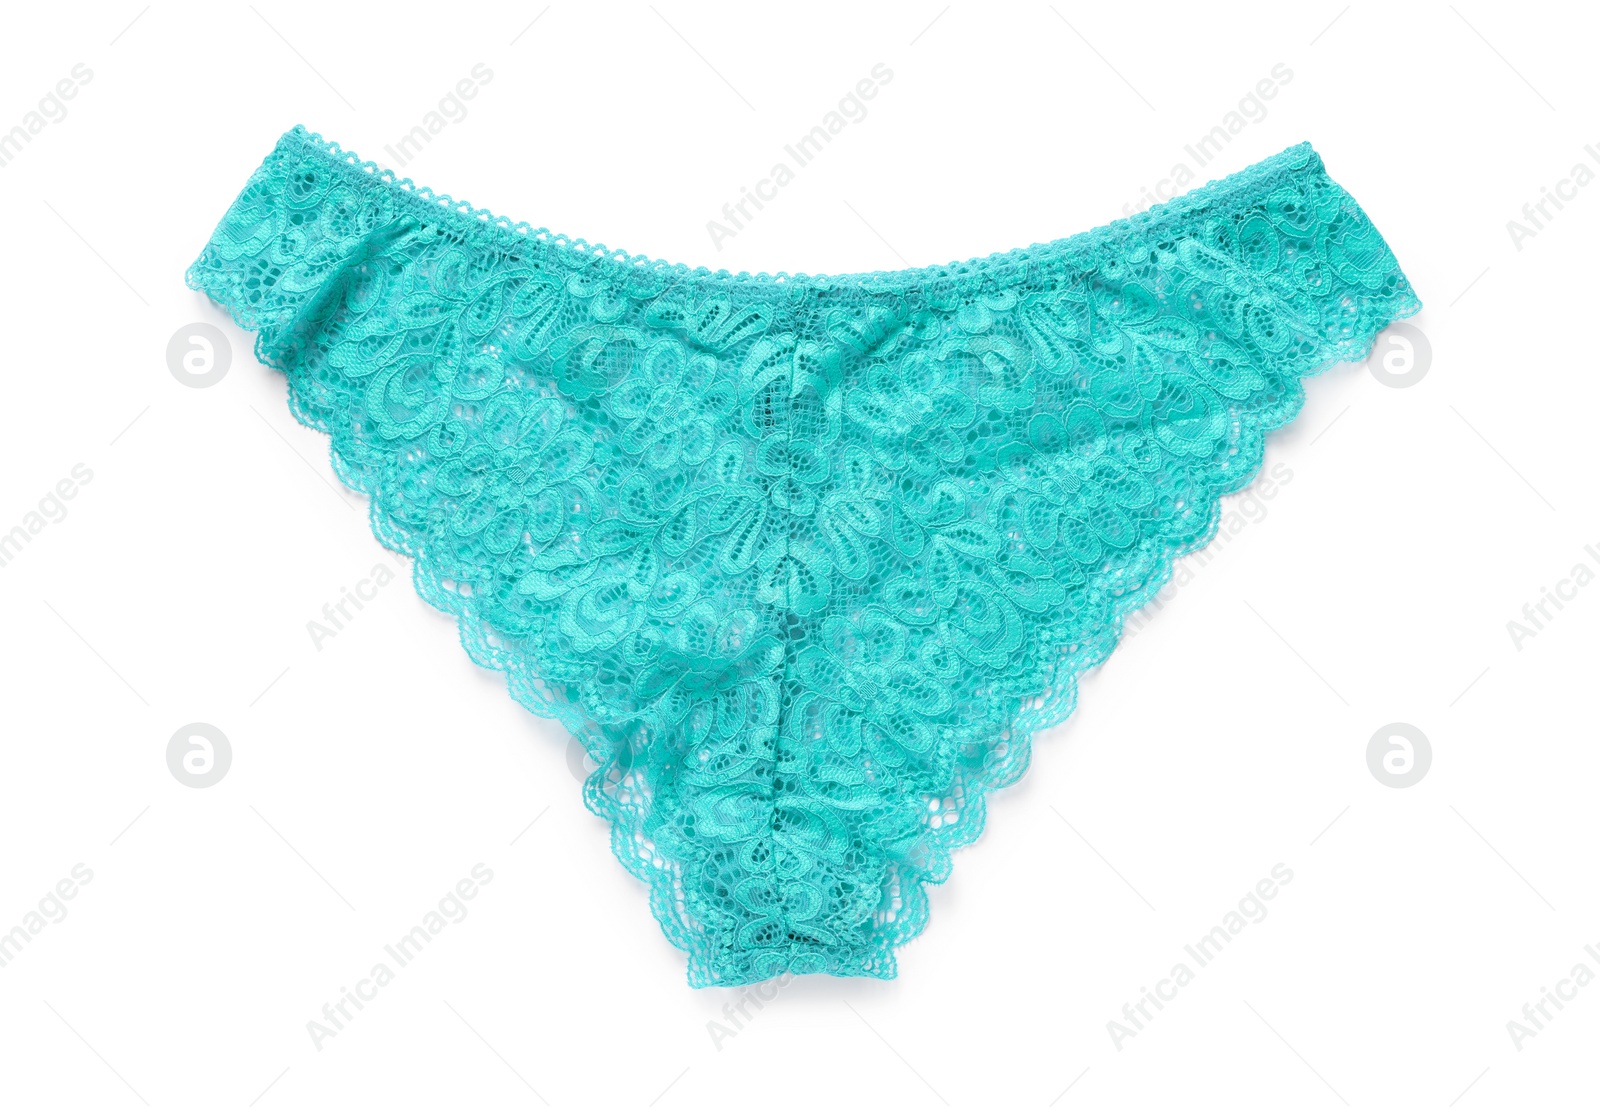 Photo of Elegant light blue women's underwear isolated on white, top view